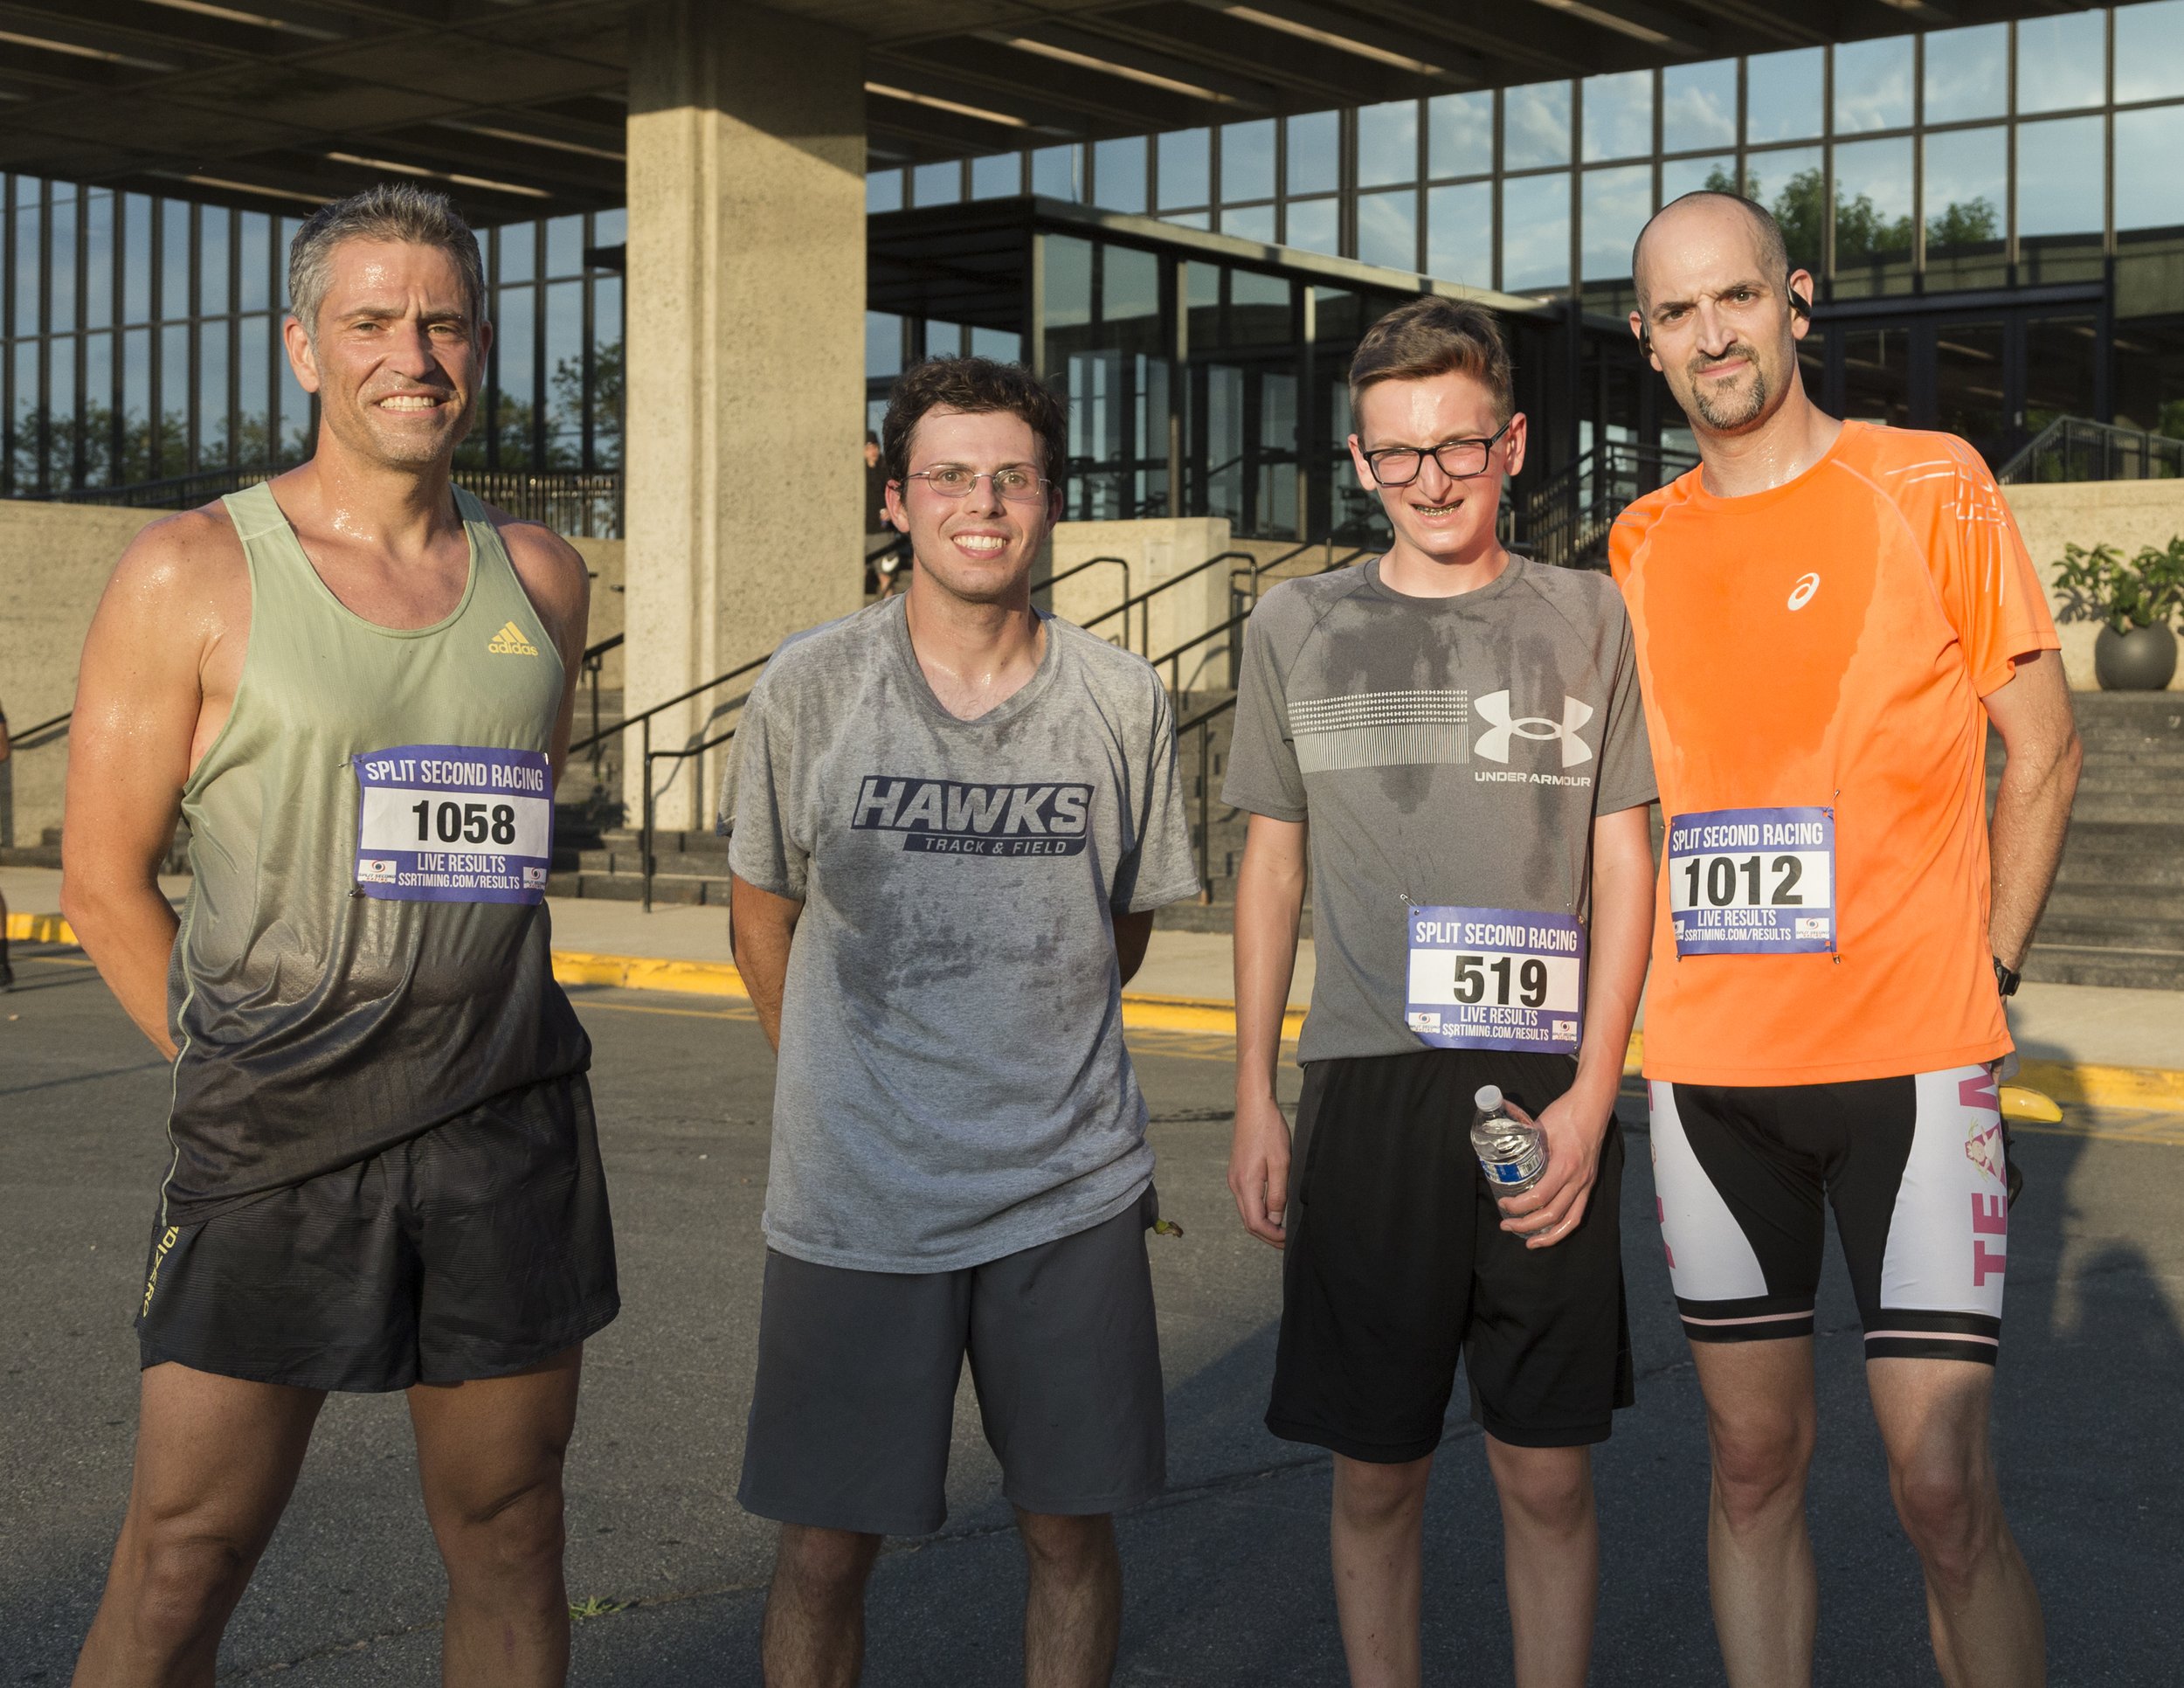 John Spinelli and other Runners after the race.jpg